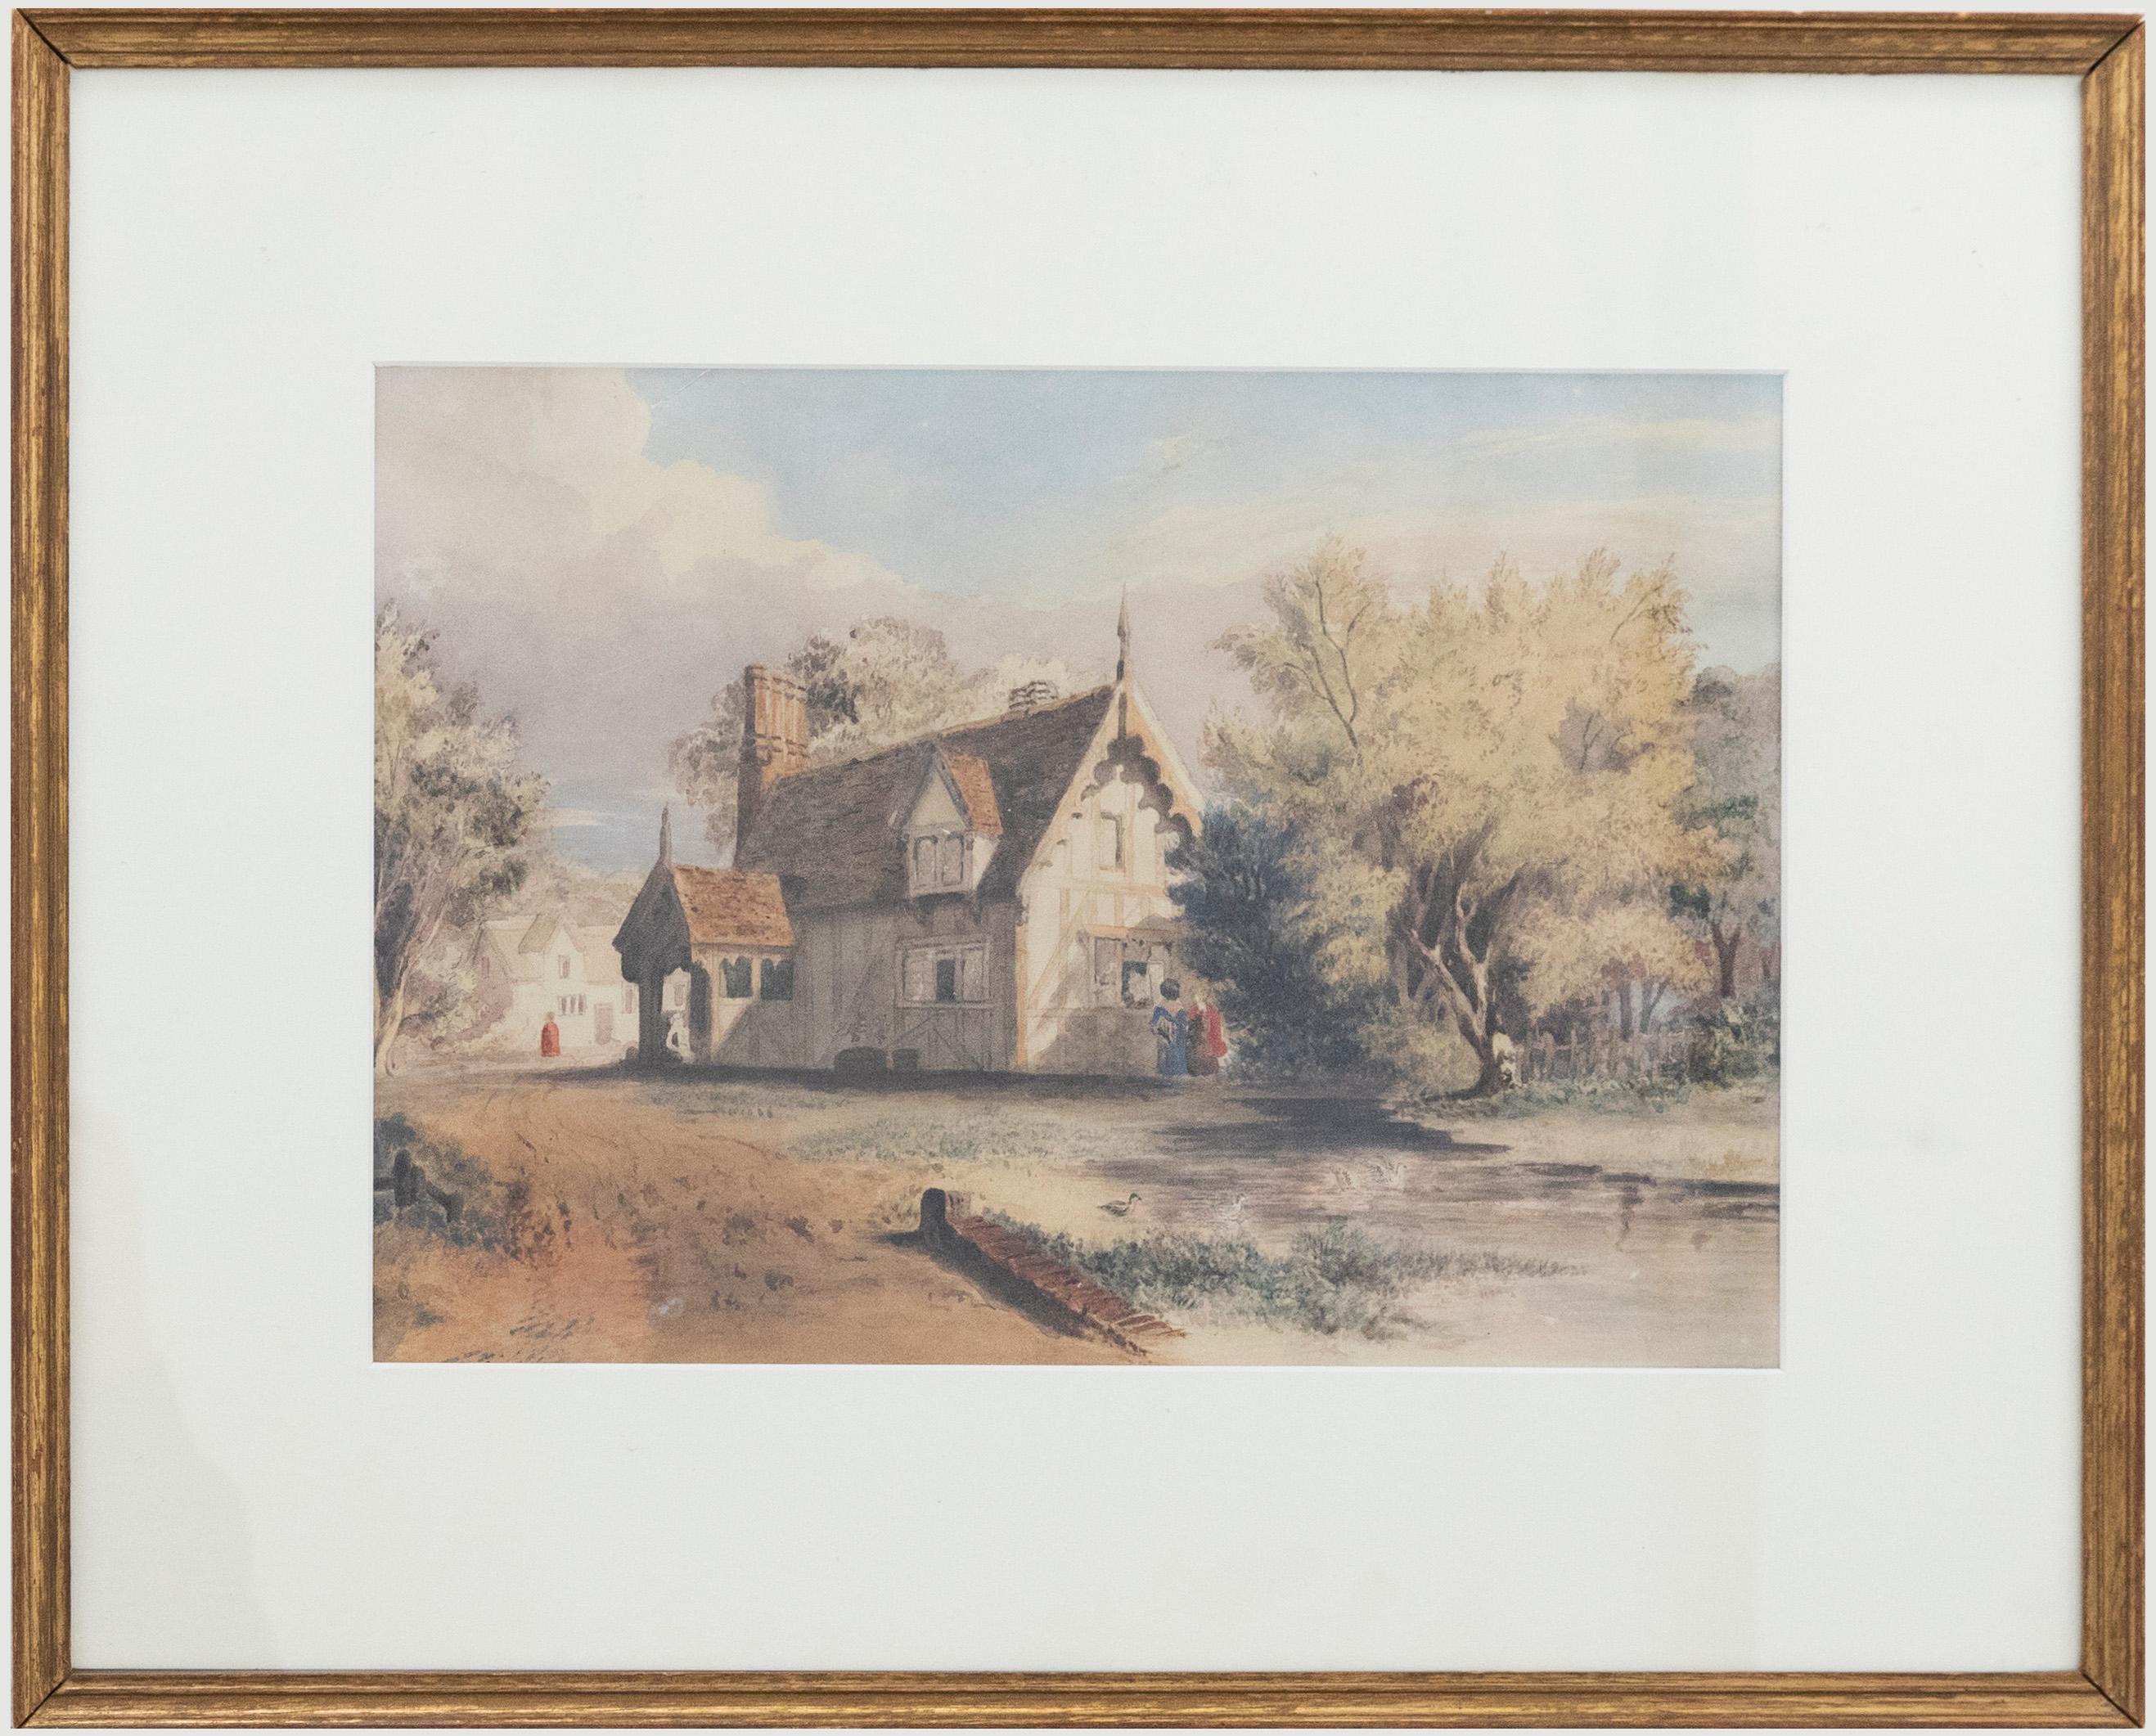 A delightful depiction of a half timbered cottage in a rural village A woman leans out of the window to talk with two women passing by. the rest of the scene captures charming details within the village such as the quaint duck pond and neighbouring